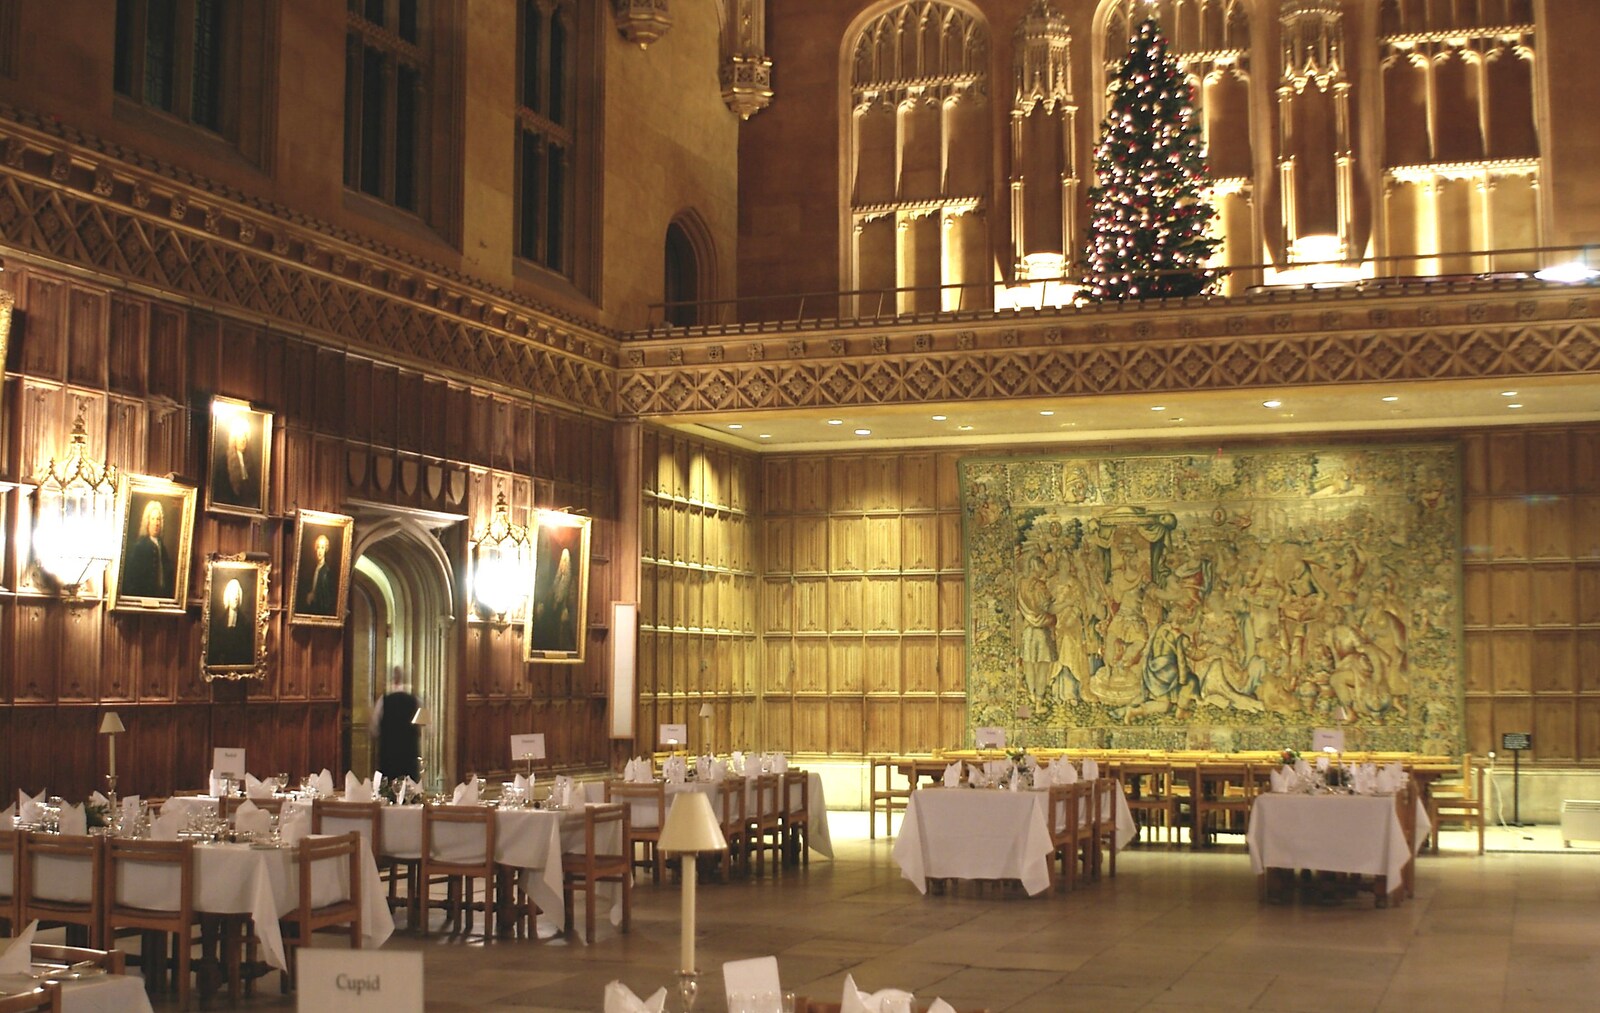 The impressive Great Dining Hall at King's from Qualcomm Cambridge's Christmas Do, King's College, Cambridge - 22nd December 2004